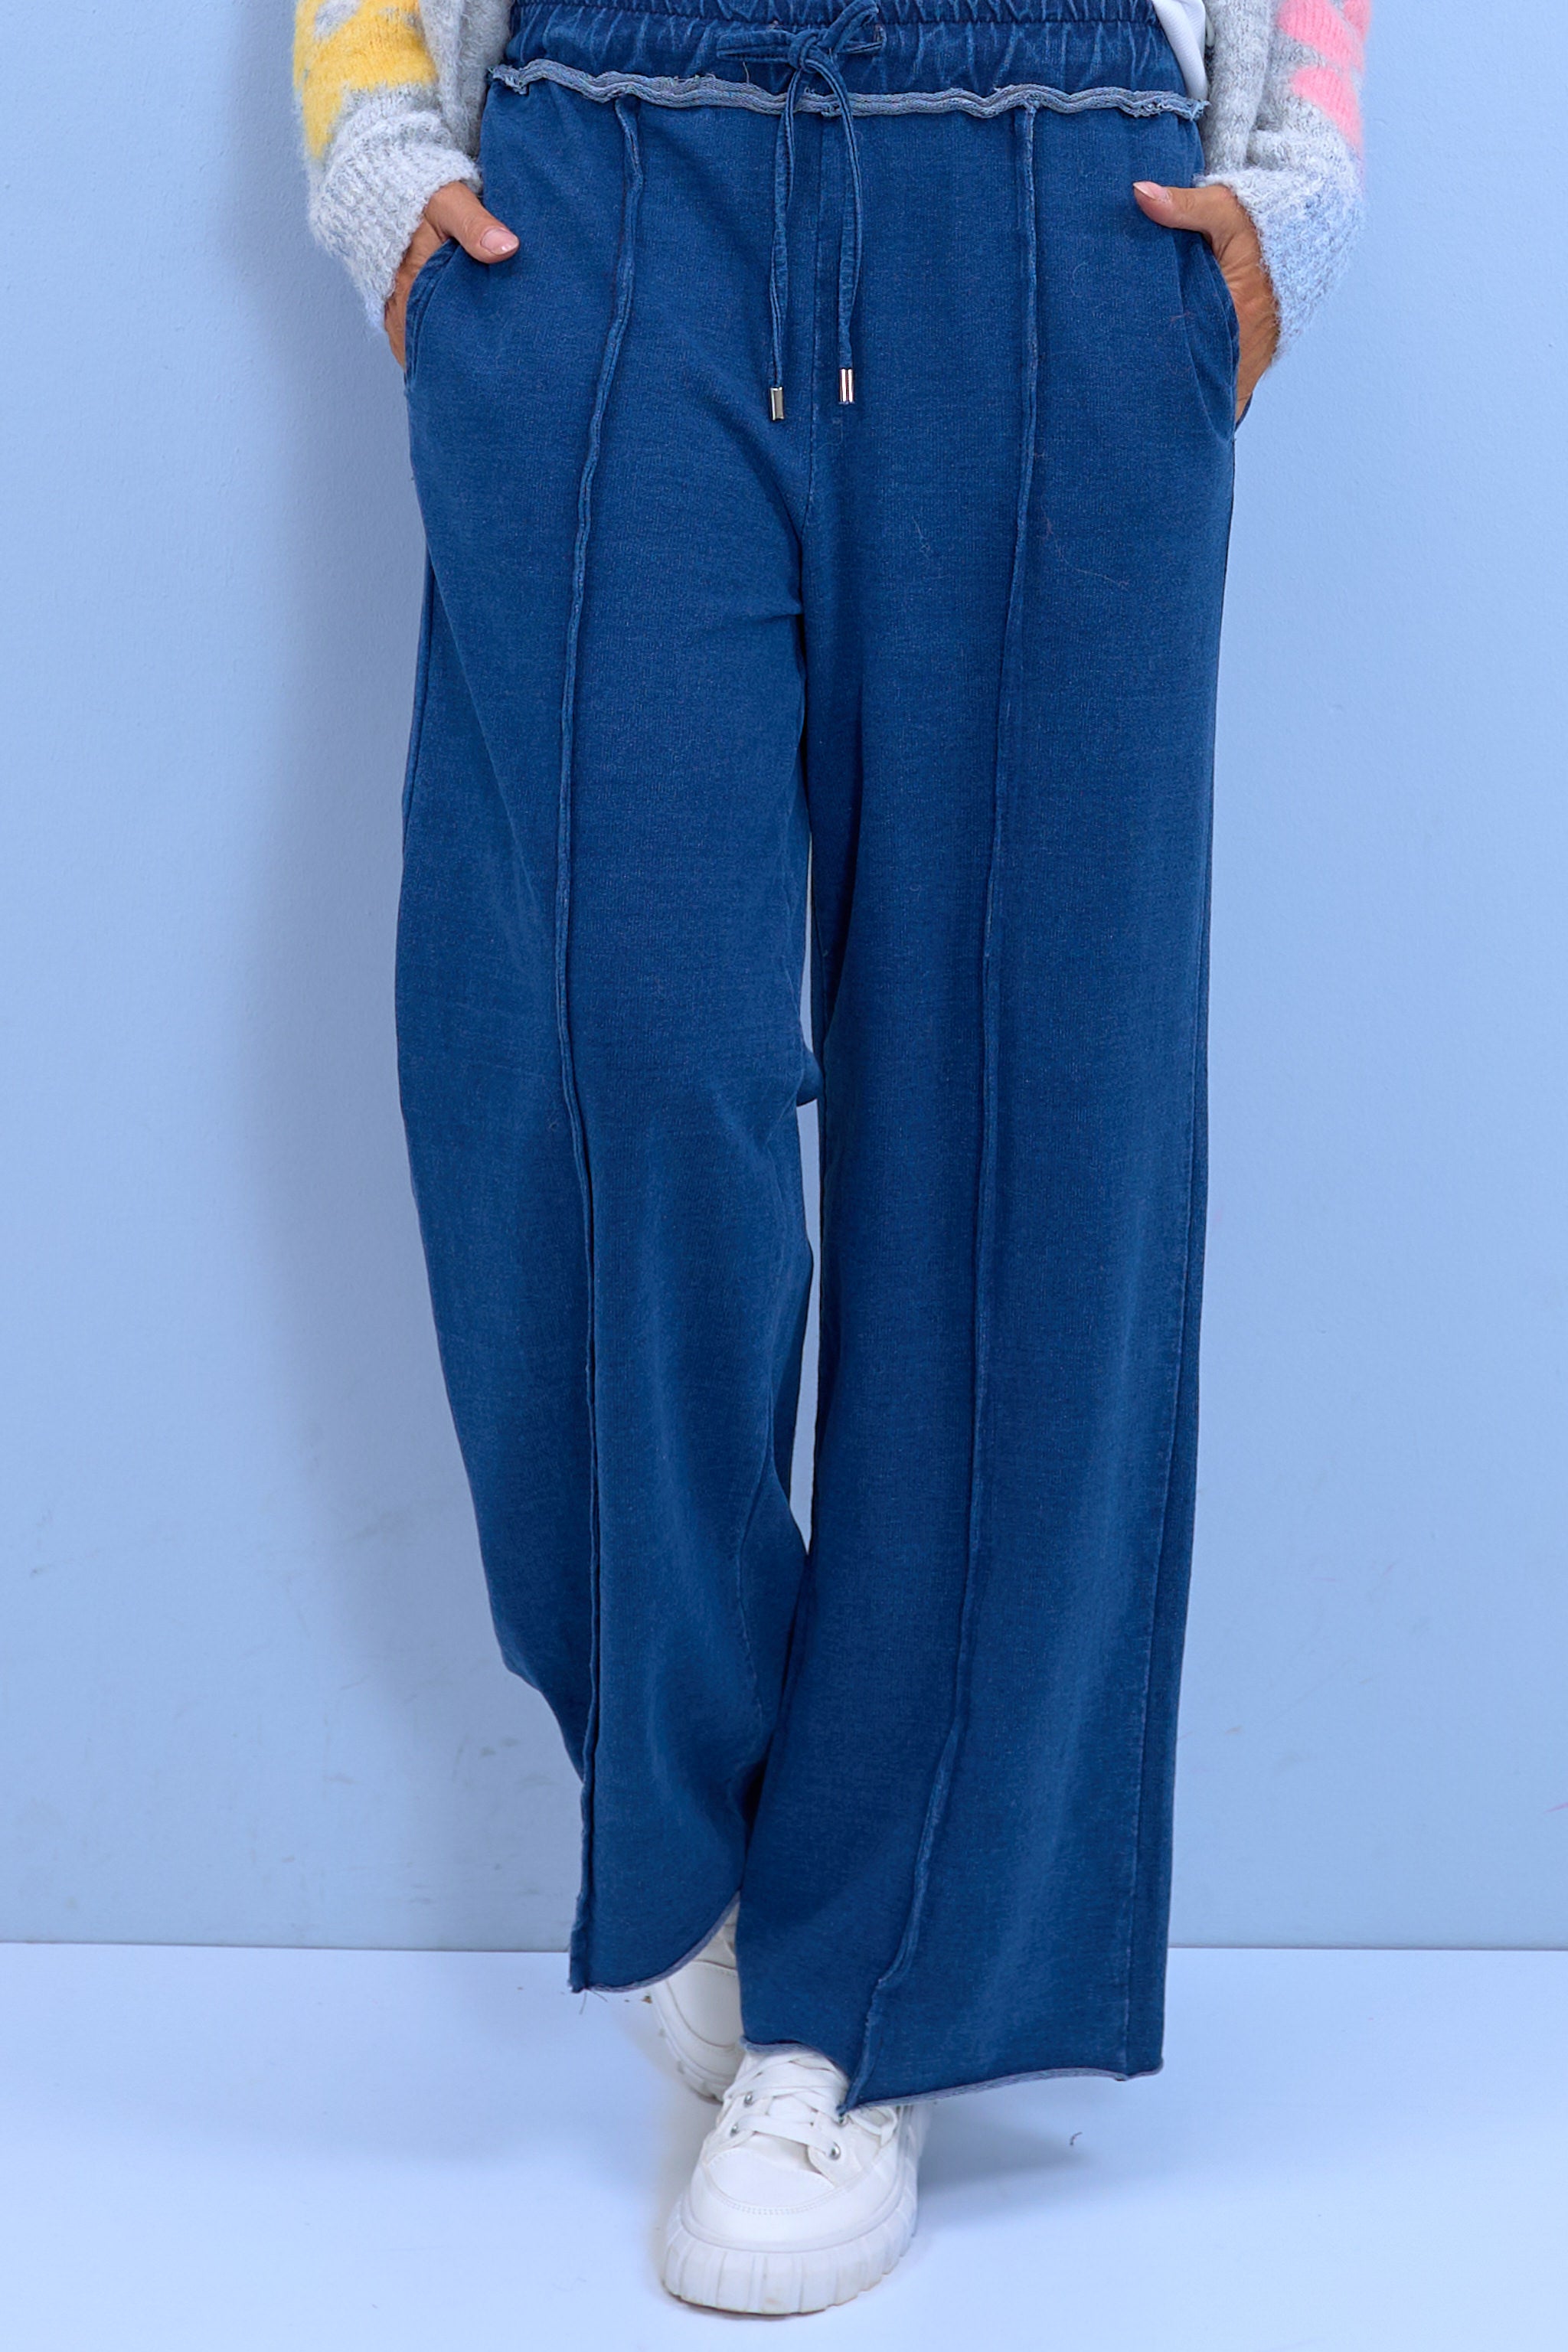 Marlene style sweatpants with piping, blue